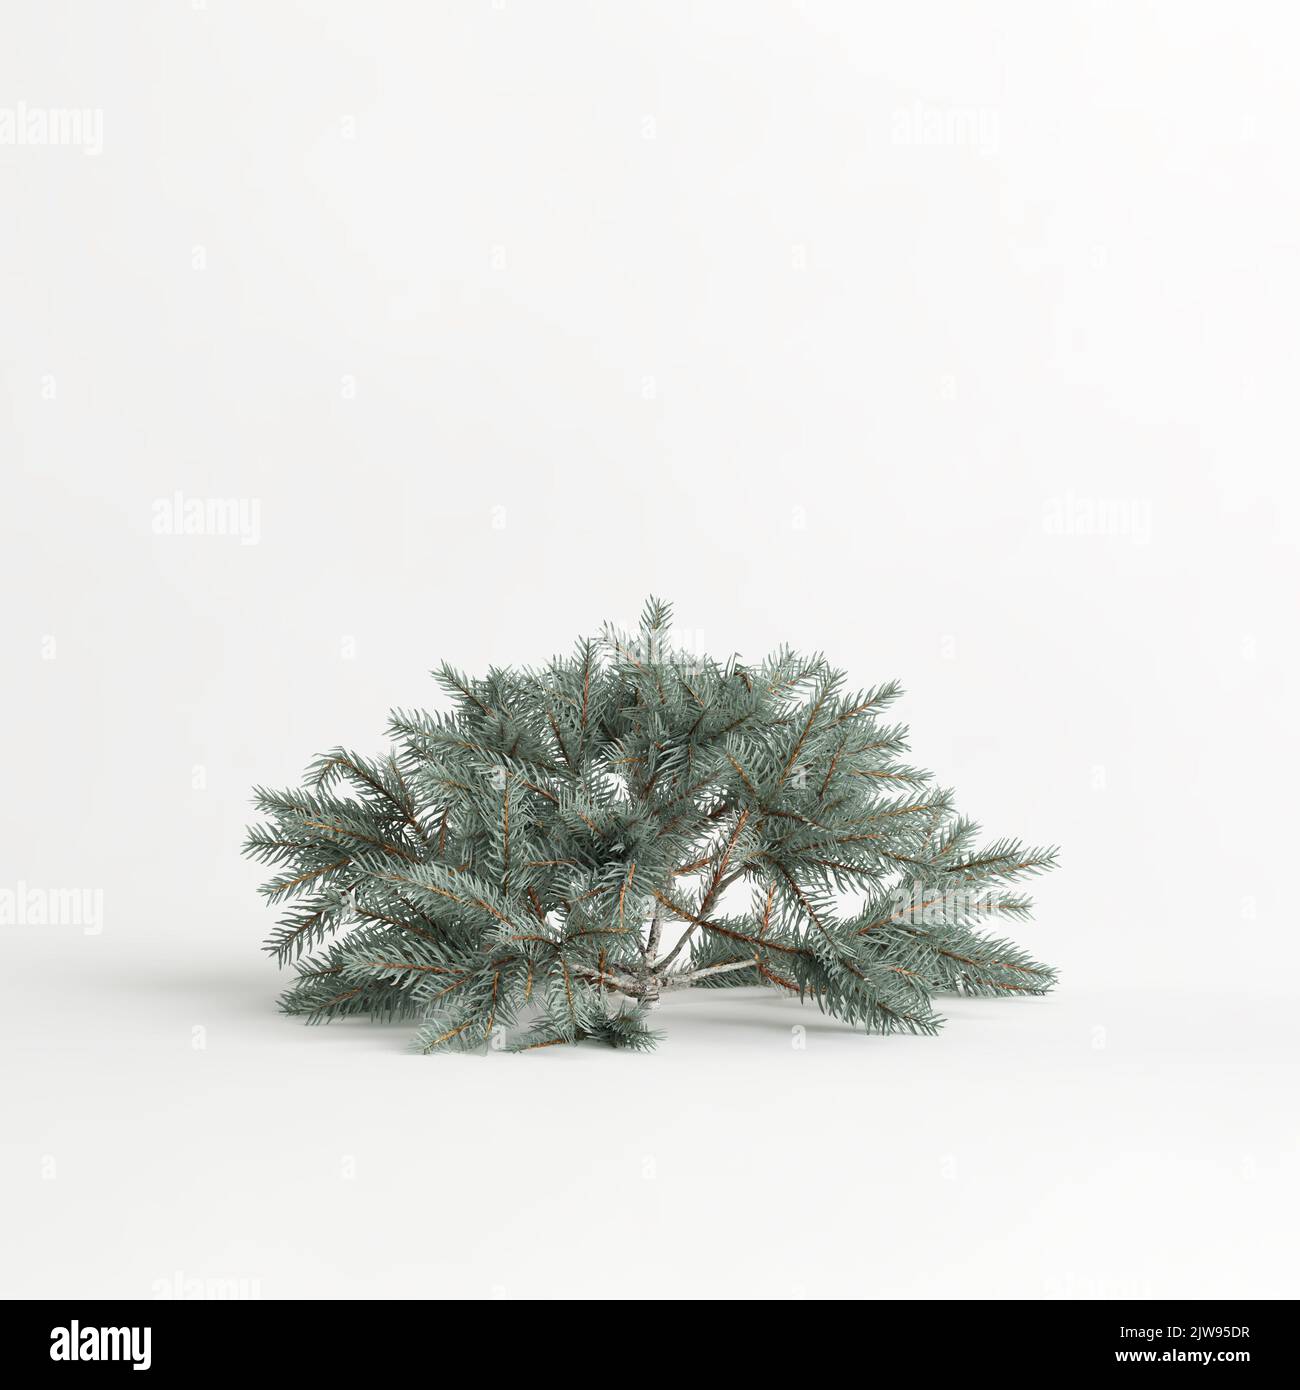 3d illustration of picea pungens glauca procumbens tree isolated on white background Stock Photo